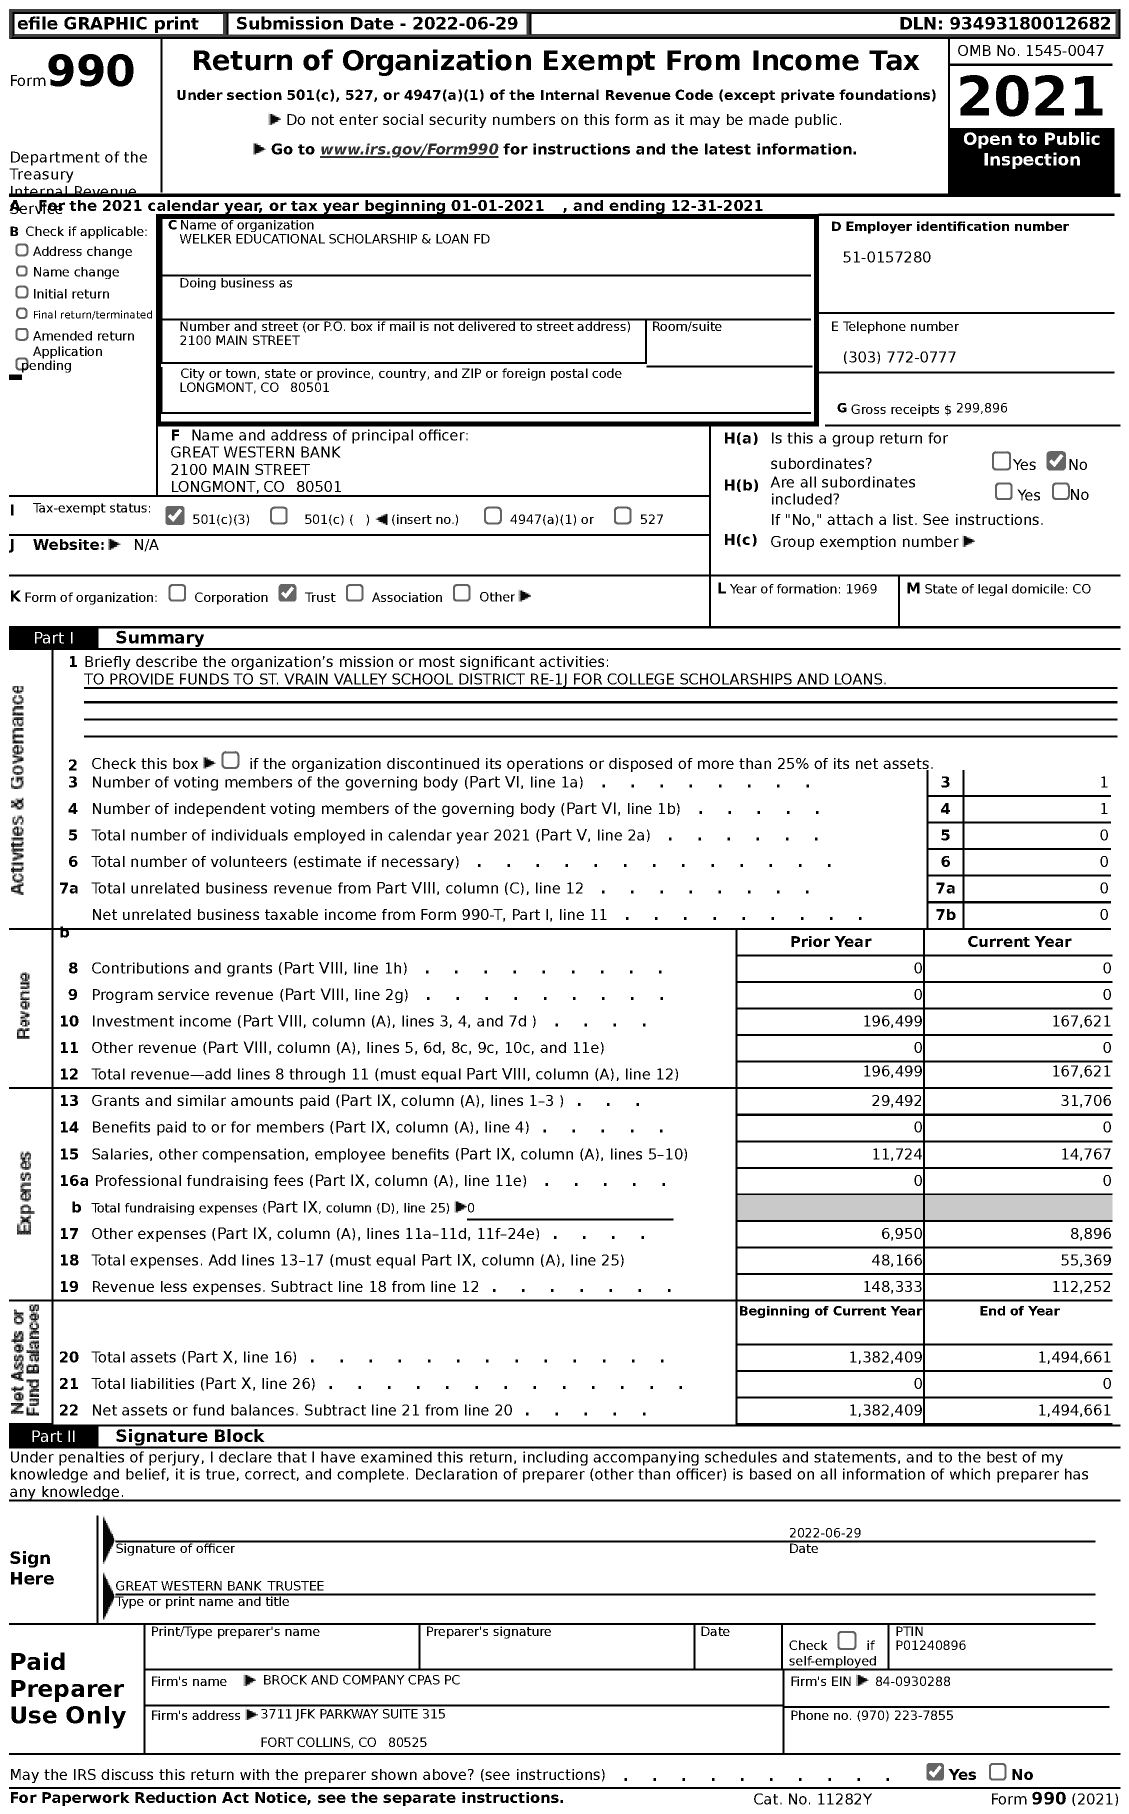 Image of first page of 2021 Form 990 for Welker Educational Scholarship and Loan FD First Interstate Bank Trustee